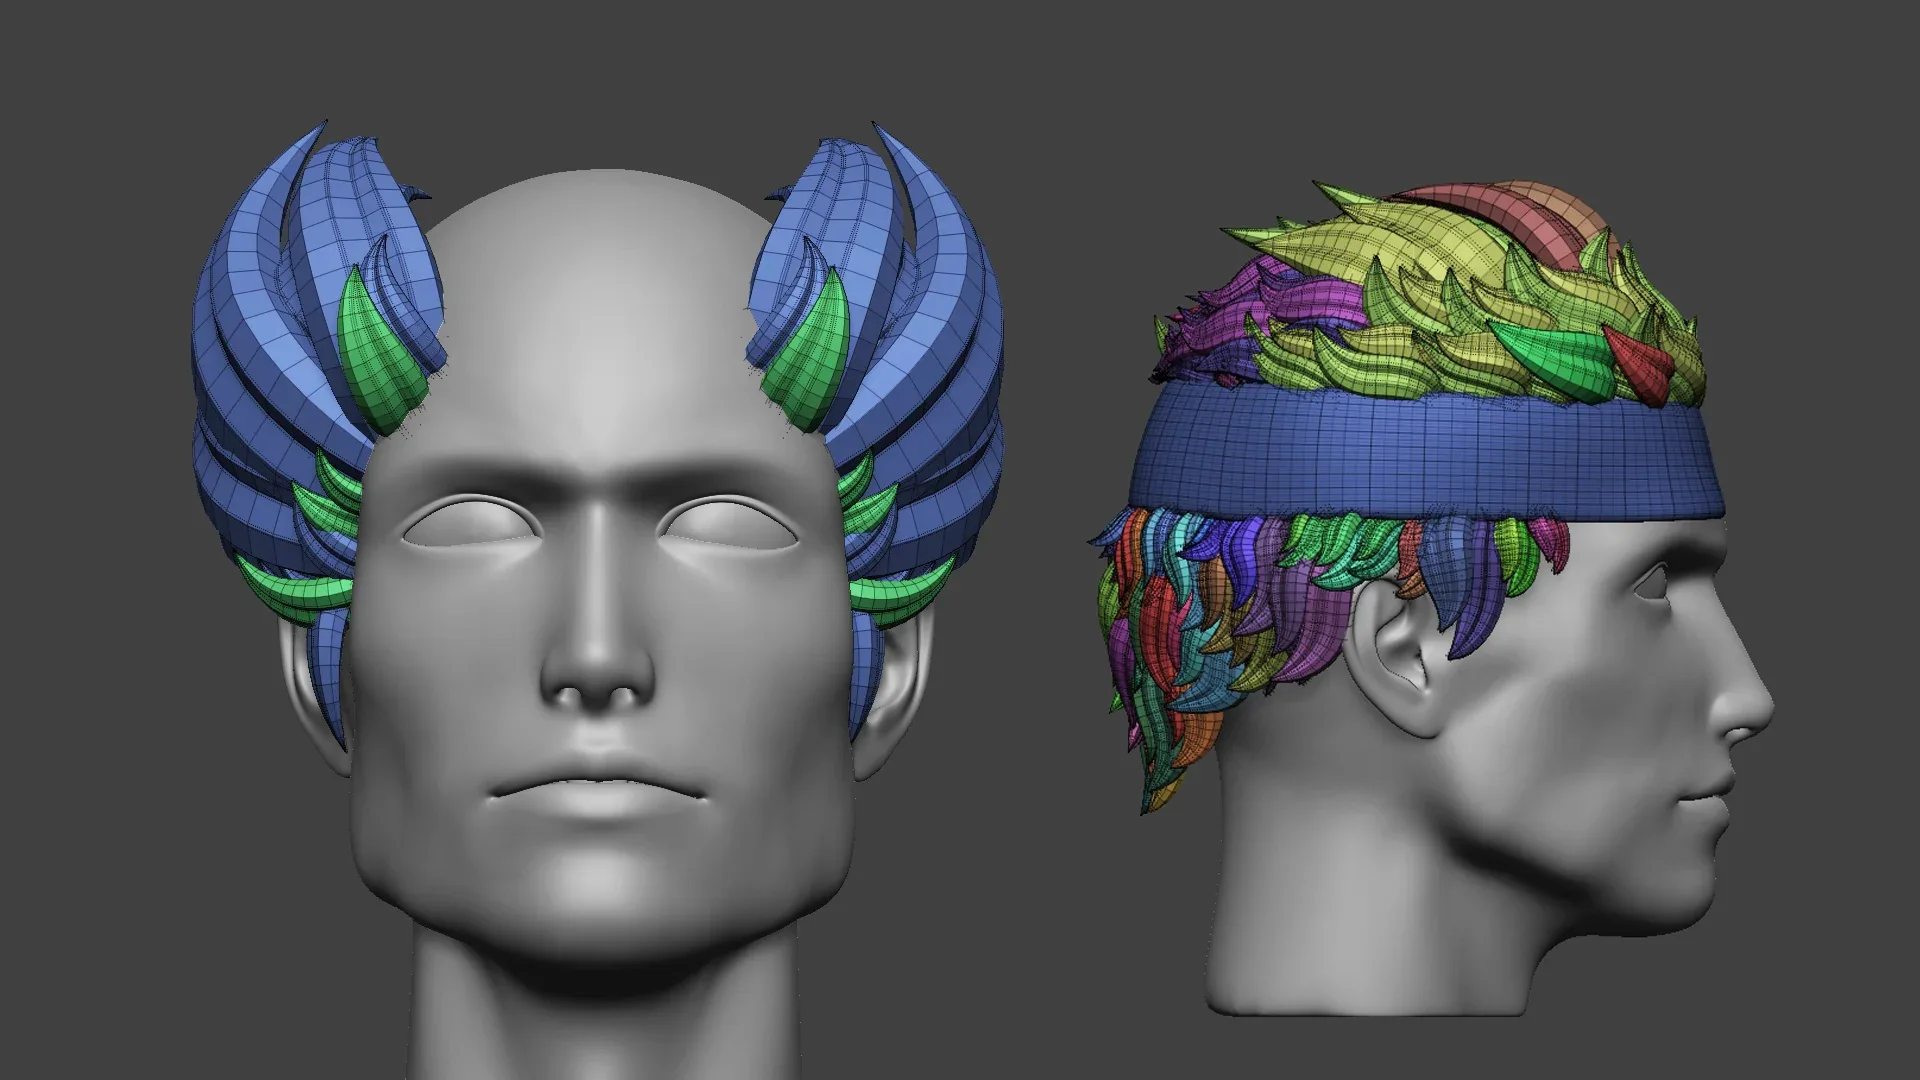 15 Male anime character hair styles and hairdoo low poly IMM brush set for Zbrush, fbx and obj files.